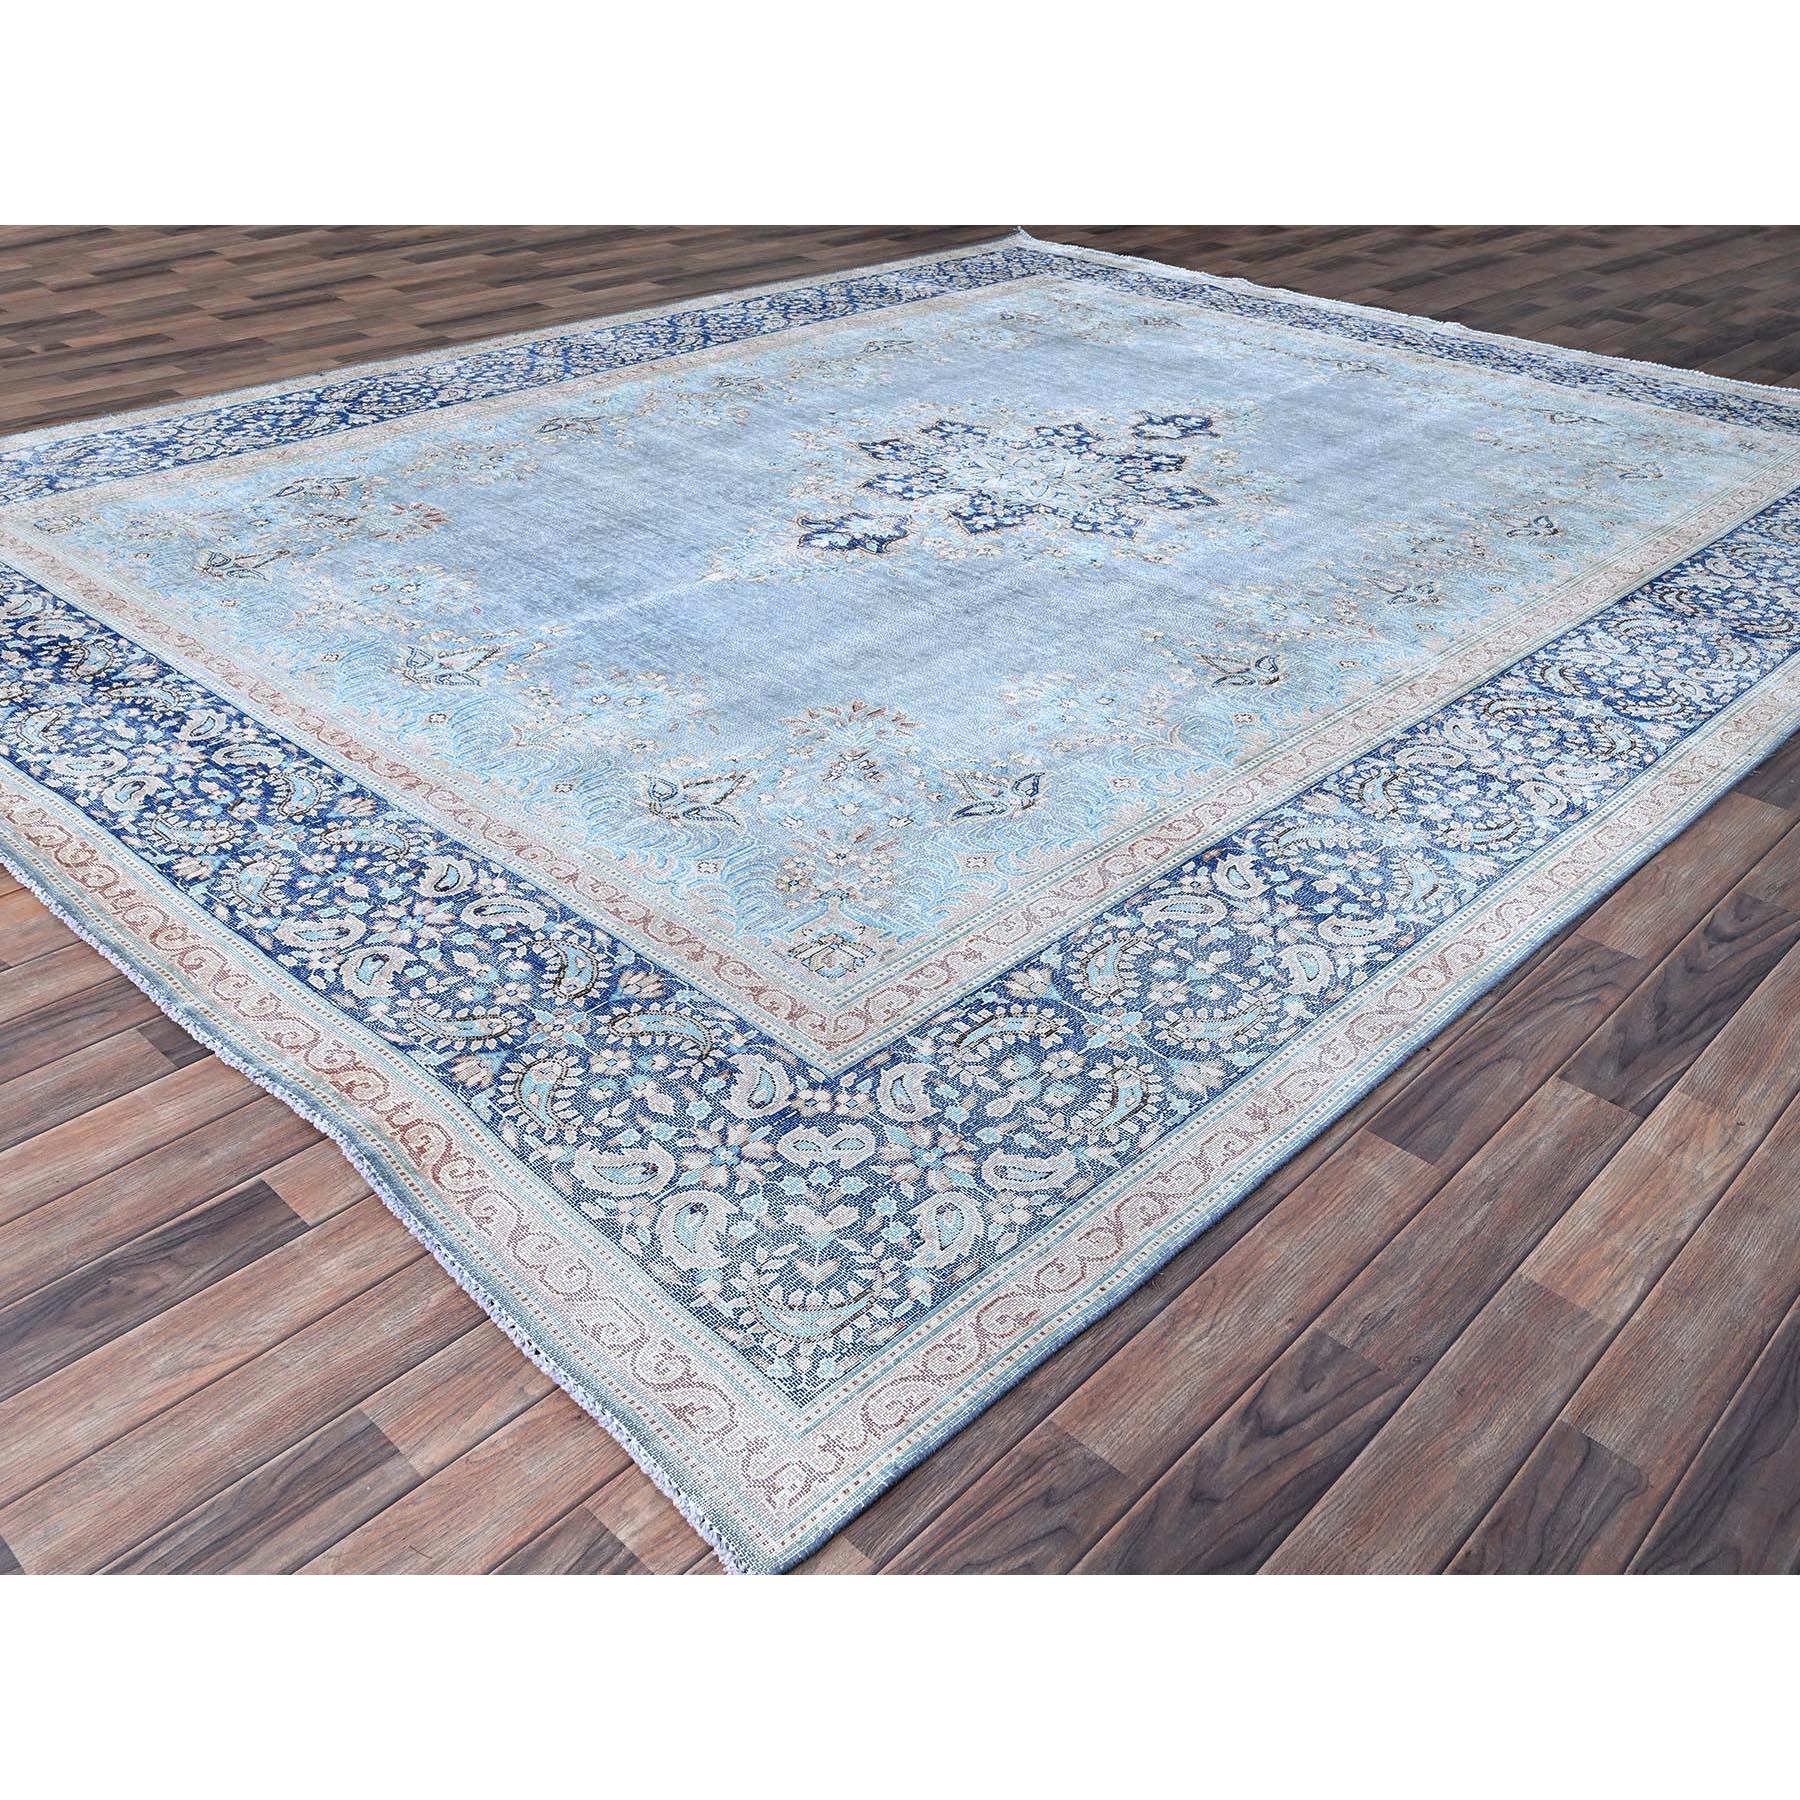 Blue Hand Knotted Wool Clean Vintage Persian Kerman Sheared Low Rustic Feel Rug In Excellent Condition For Sale In Carlstadt, NJ